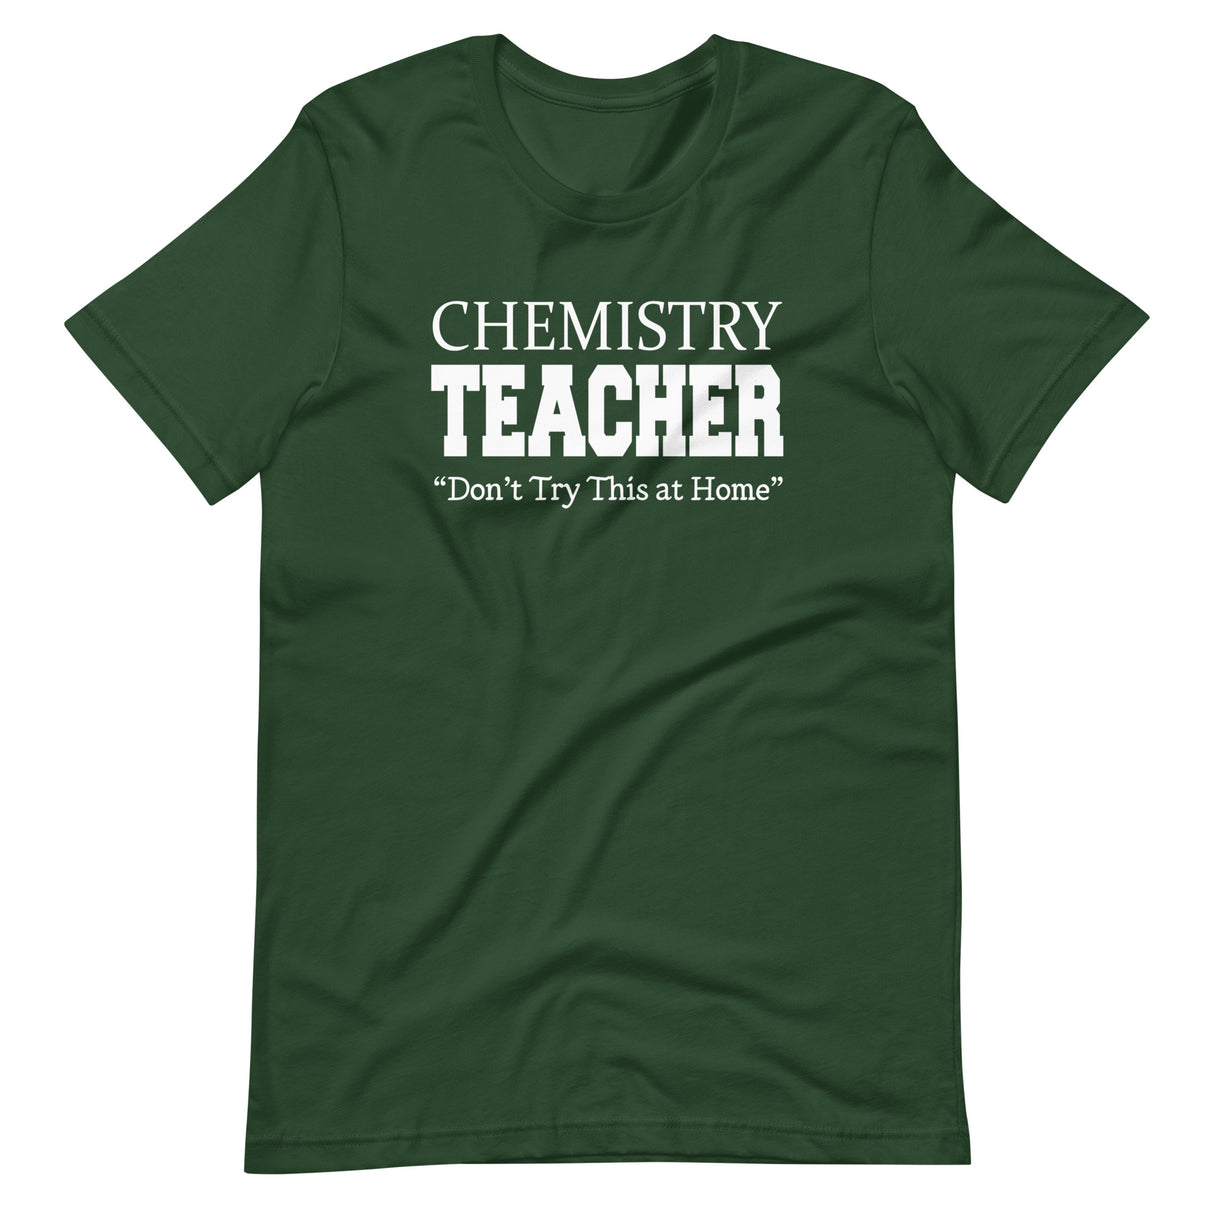 Chemistry Teacher Don't Try This at Home Shirt